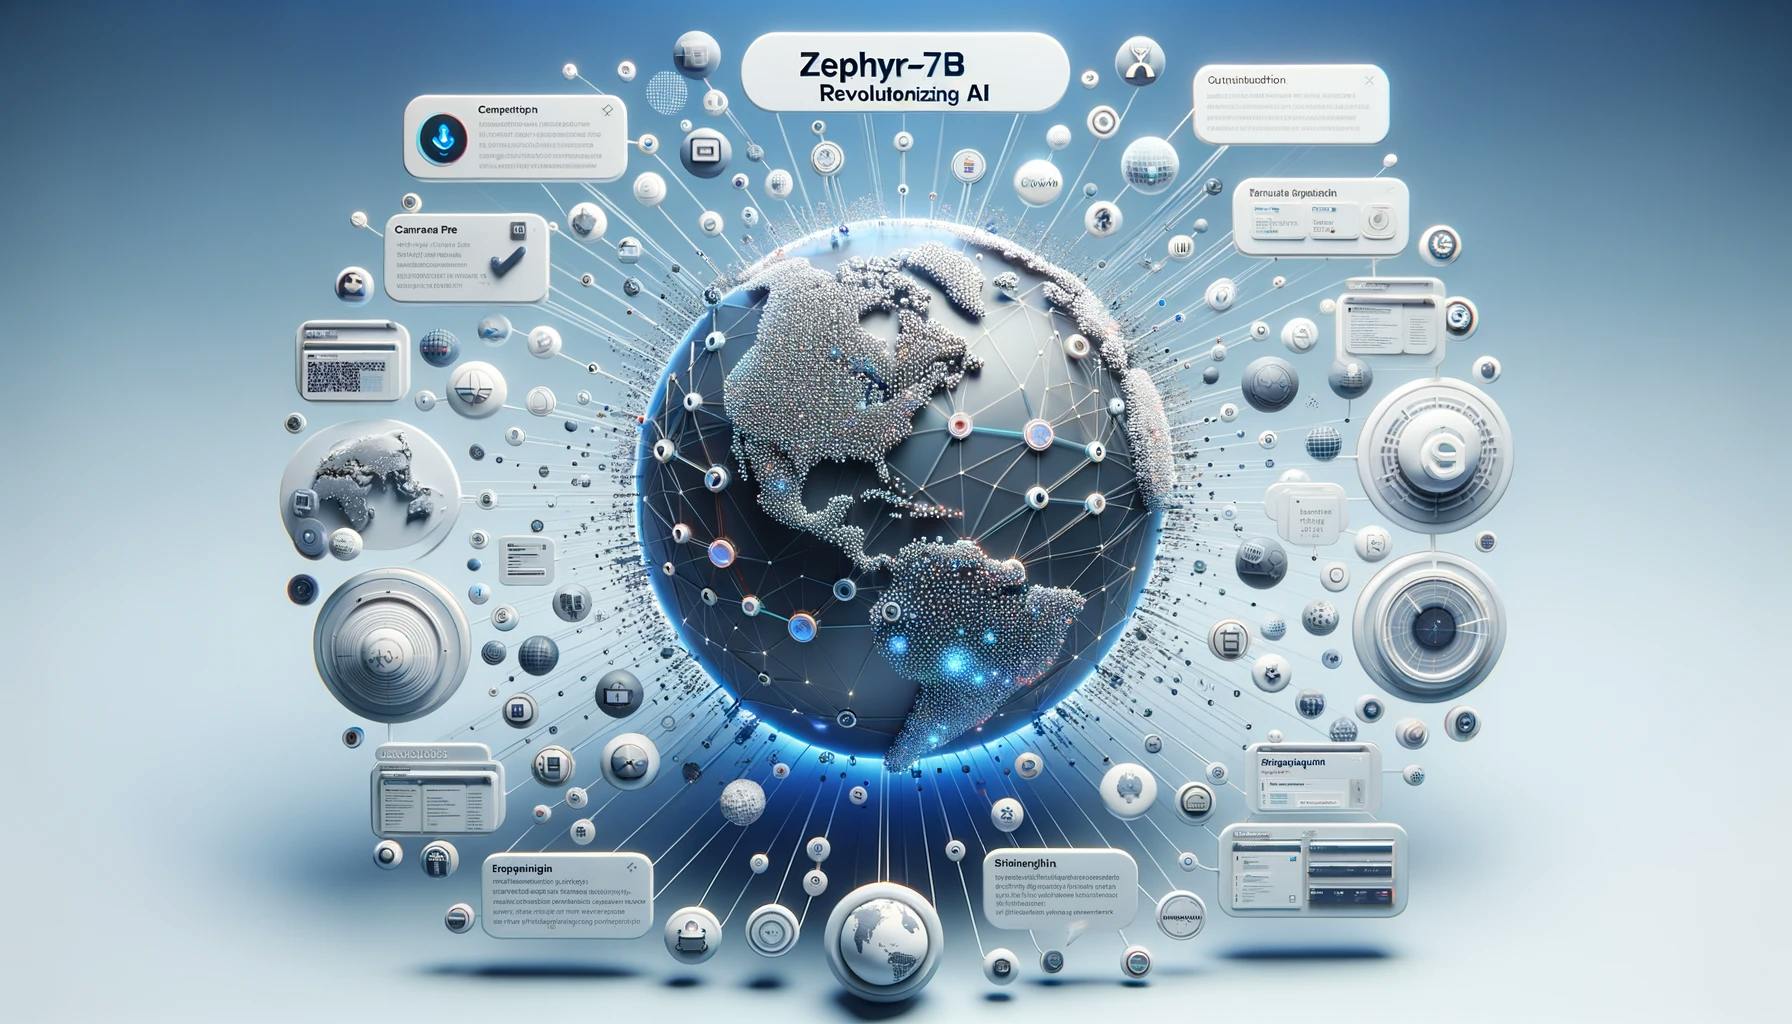 Dive into the world of Zephyr-7b, the groundbreaking language model that's setting new standards in AI. Discover its unique features, technical specs, and how you can get started with it today. Don't miss out on the future of open-source AI!